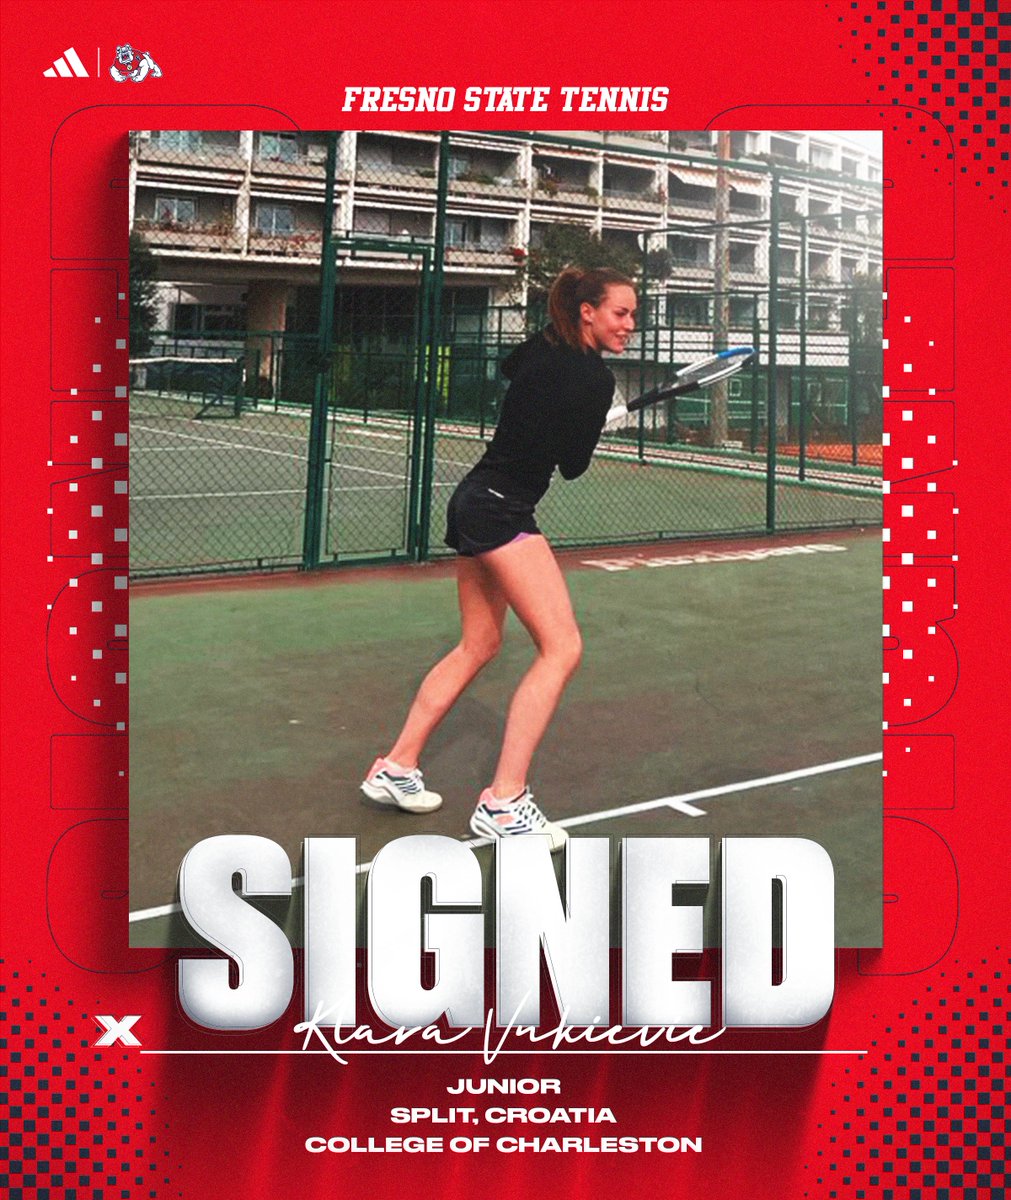 𝙎𝙄𝙂𝙉𝙀𝘿 🖊️ It's official, welcome to the Bulldog family Klara! 🐾